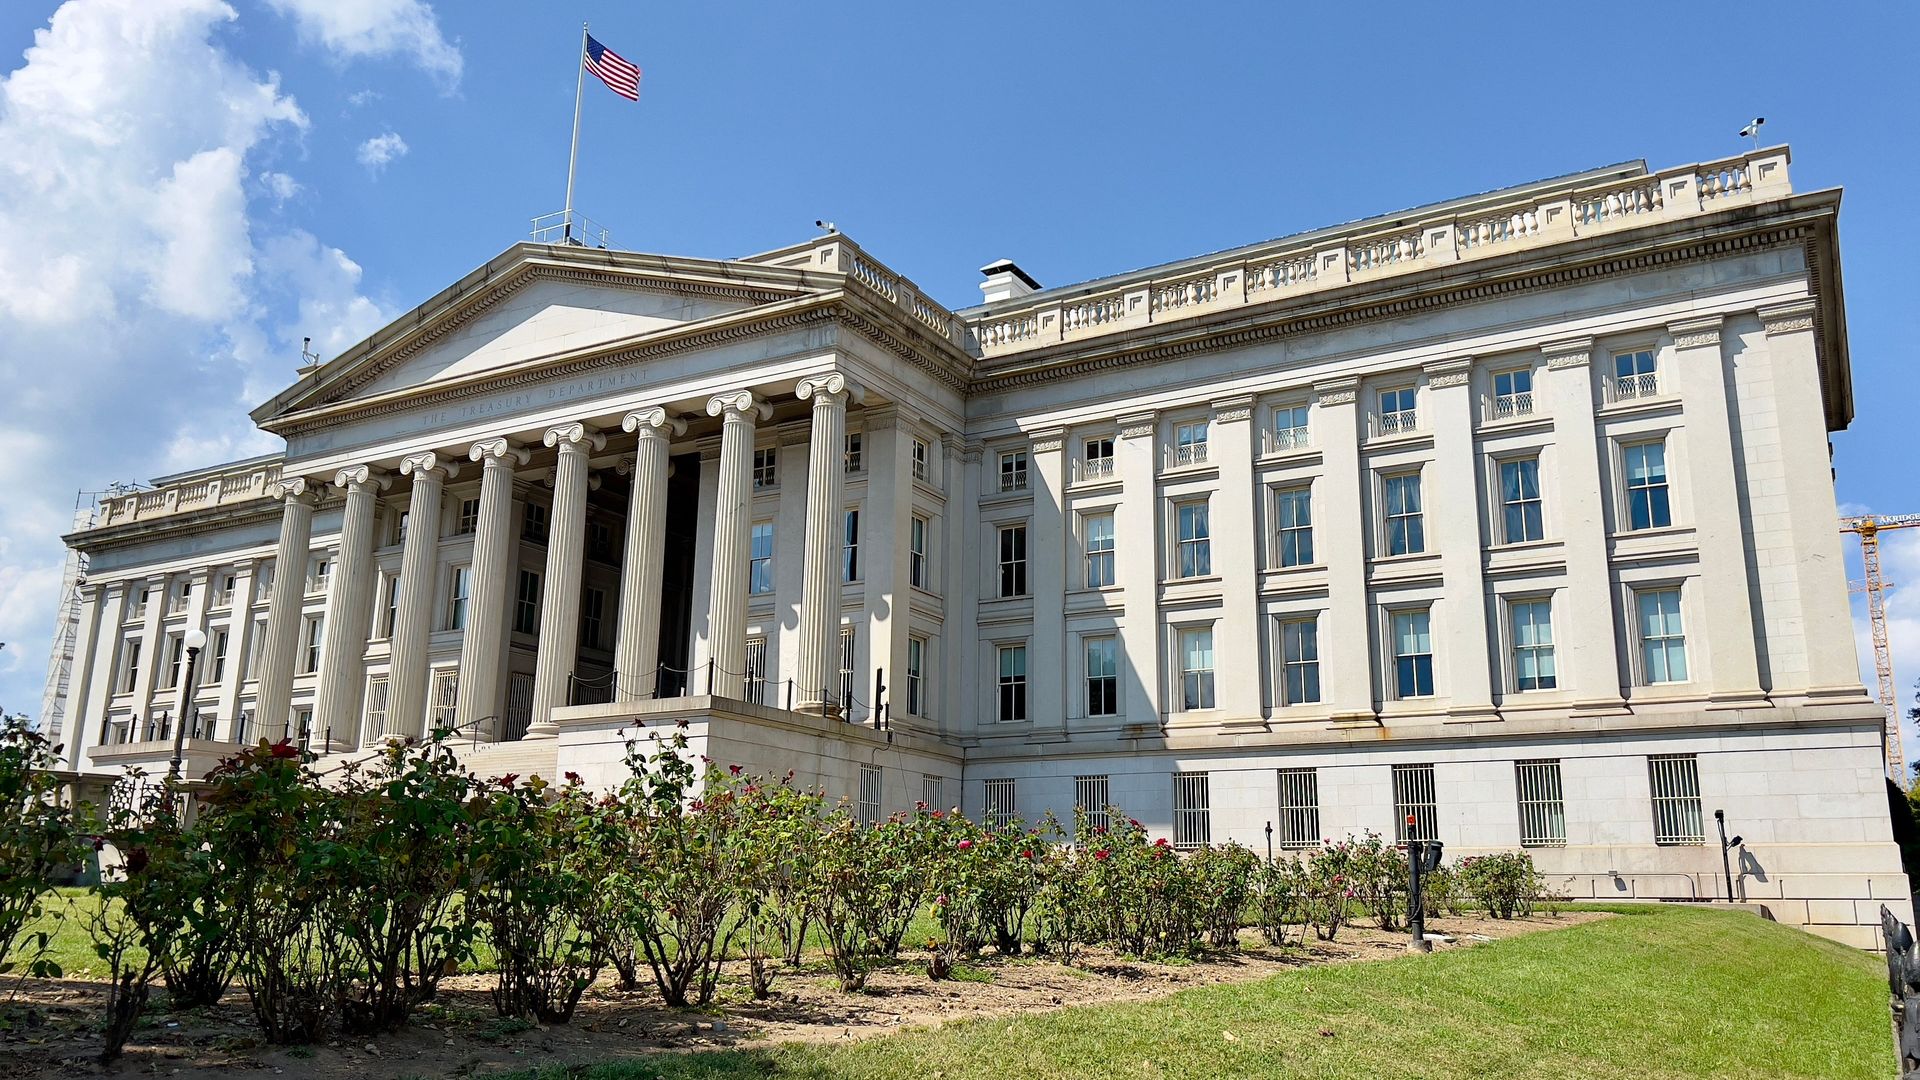 The Department of the Treasury building is seen in Washington, DC.